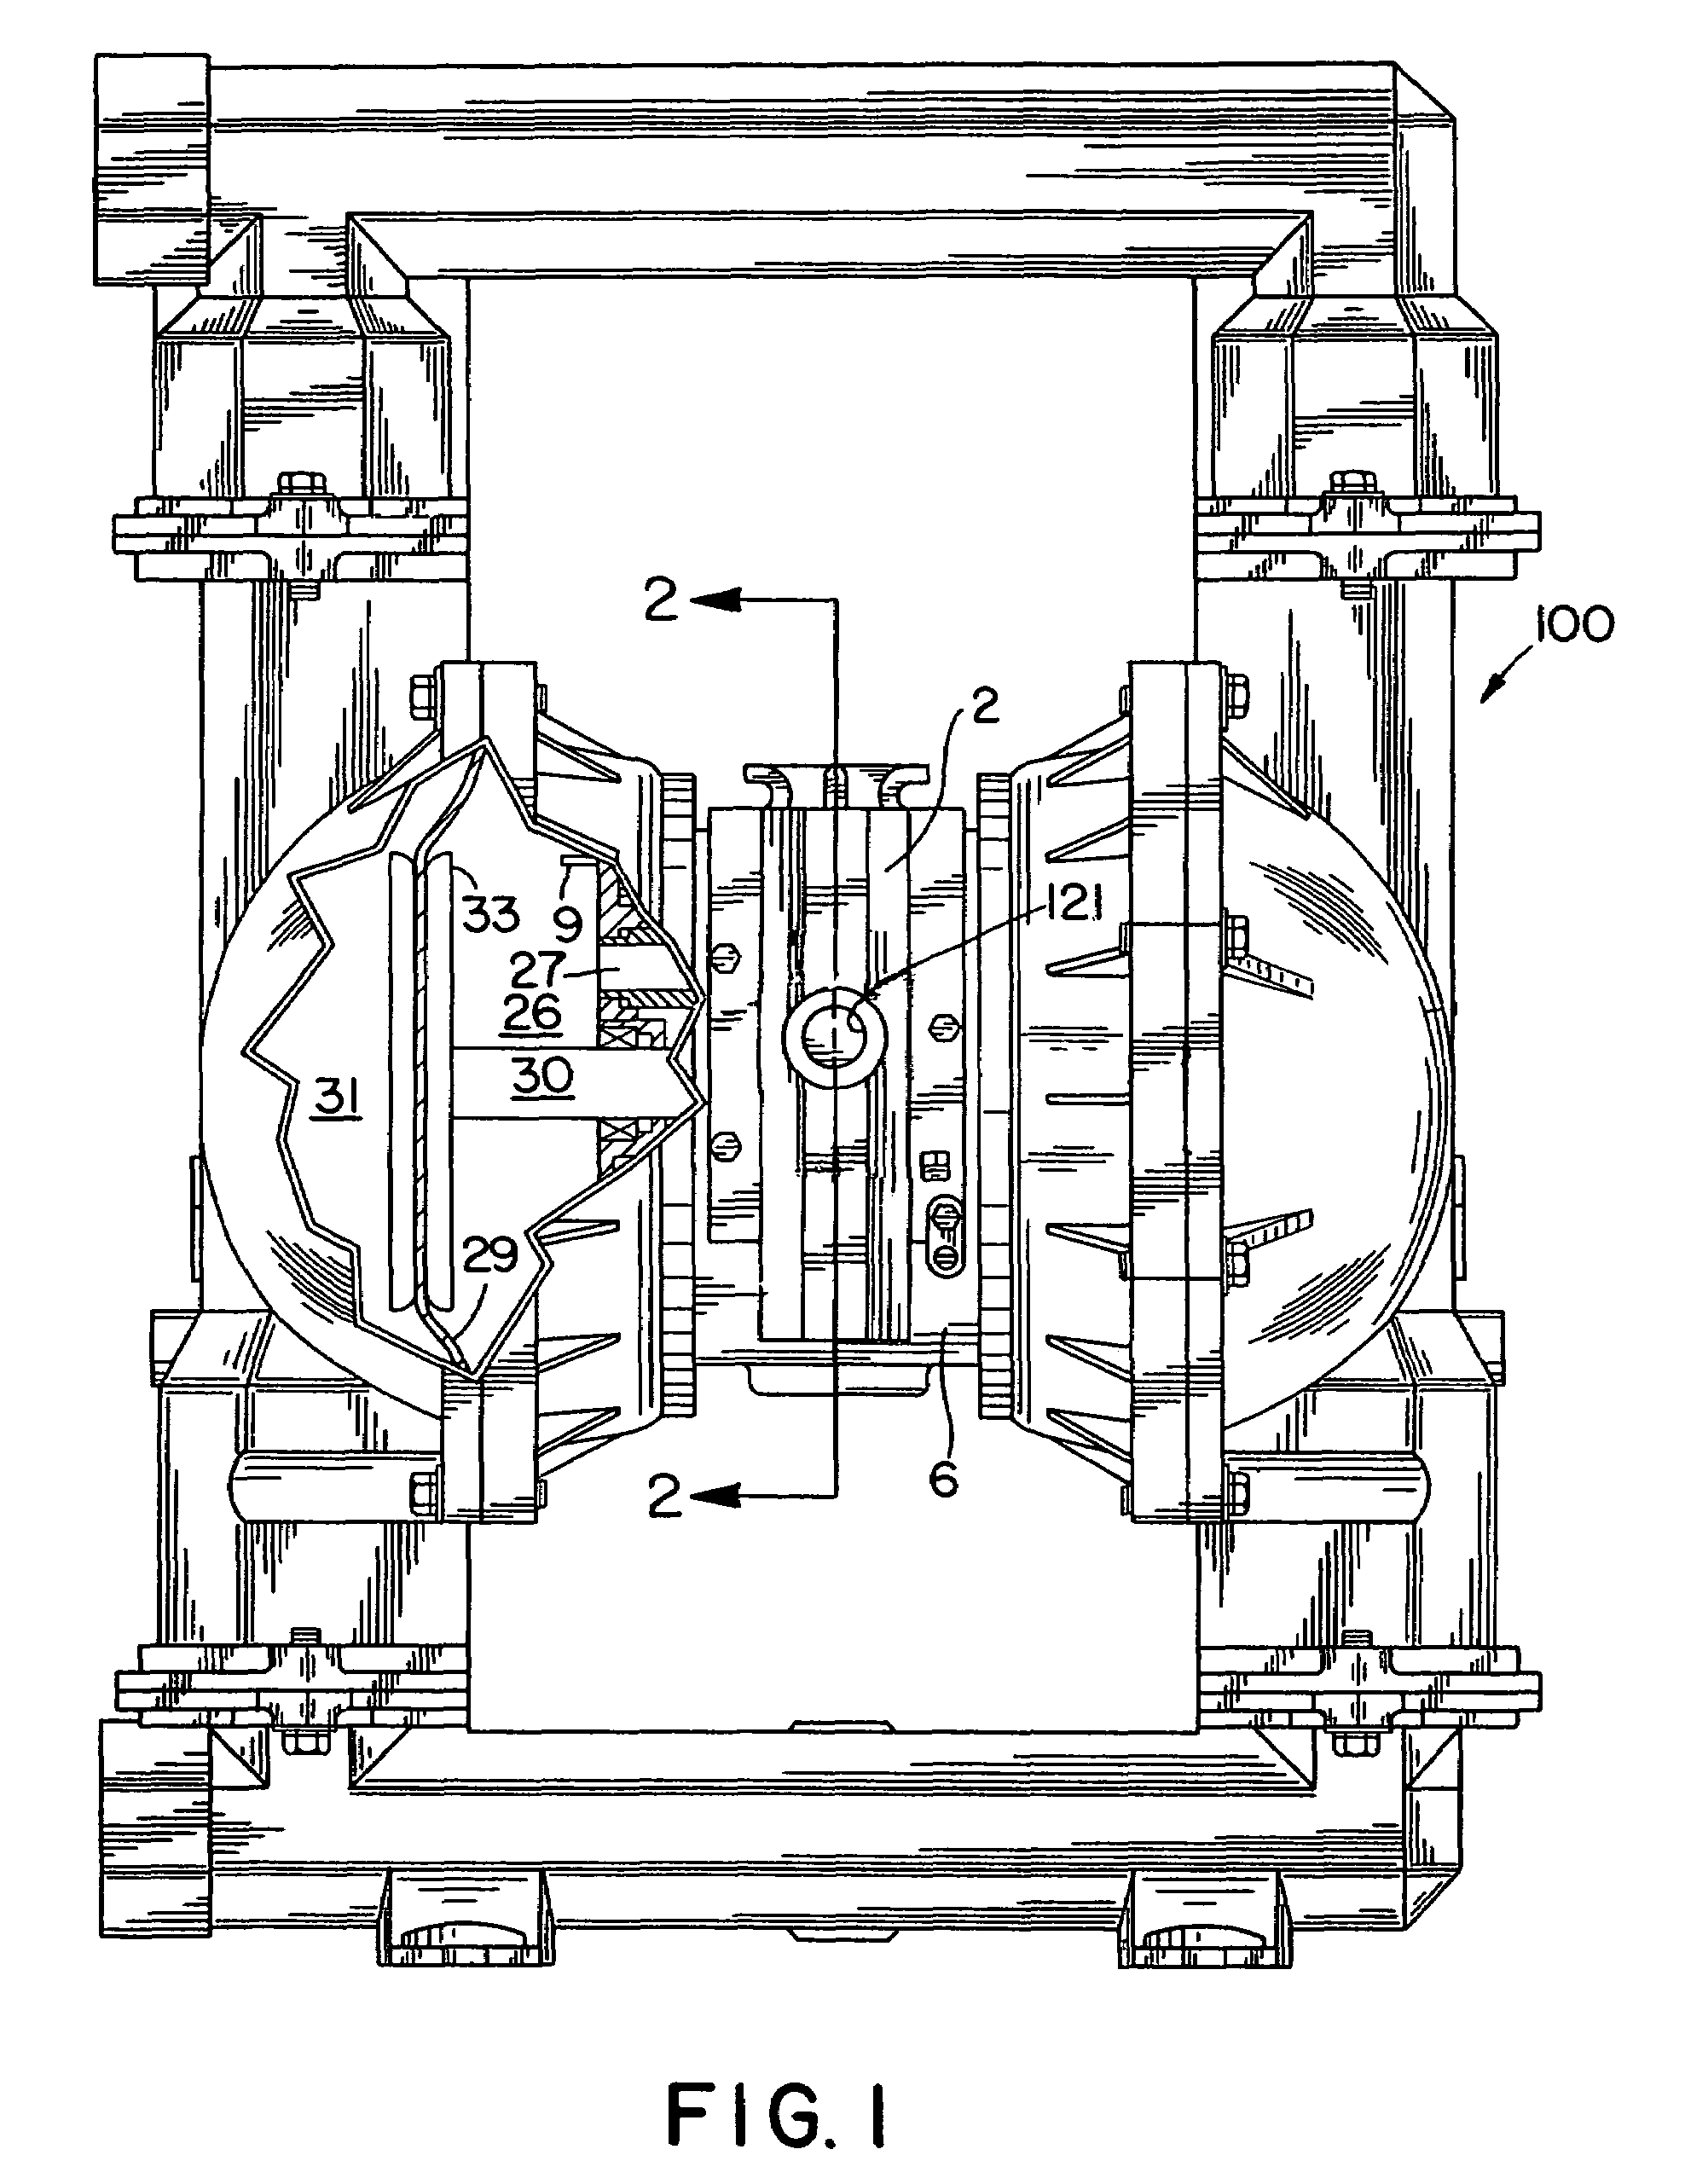 Reduced icing valves and gas-driven motor and reciprocating pump incorporating same